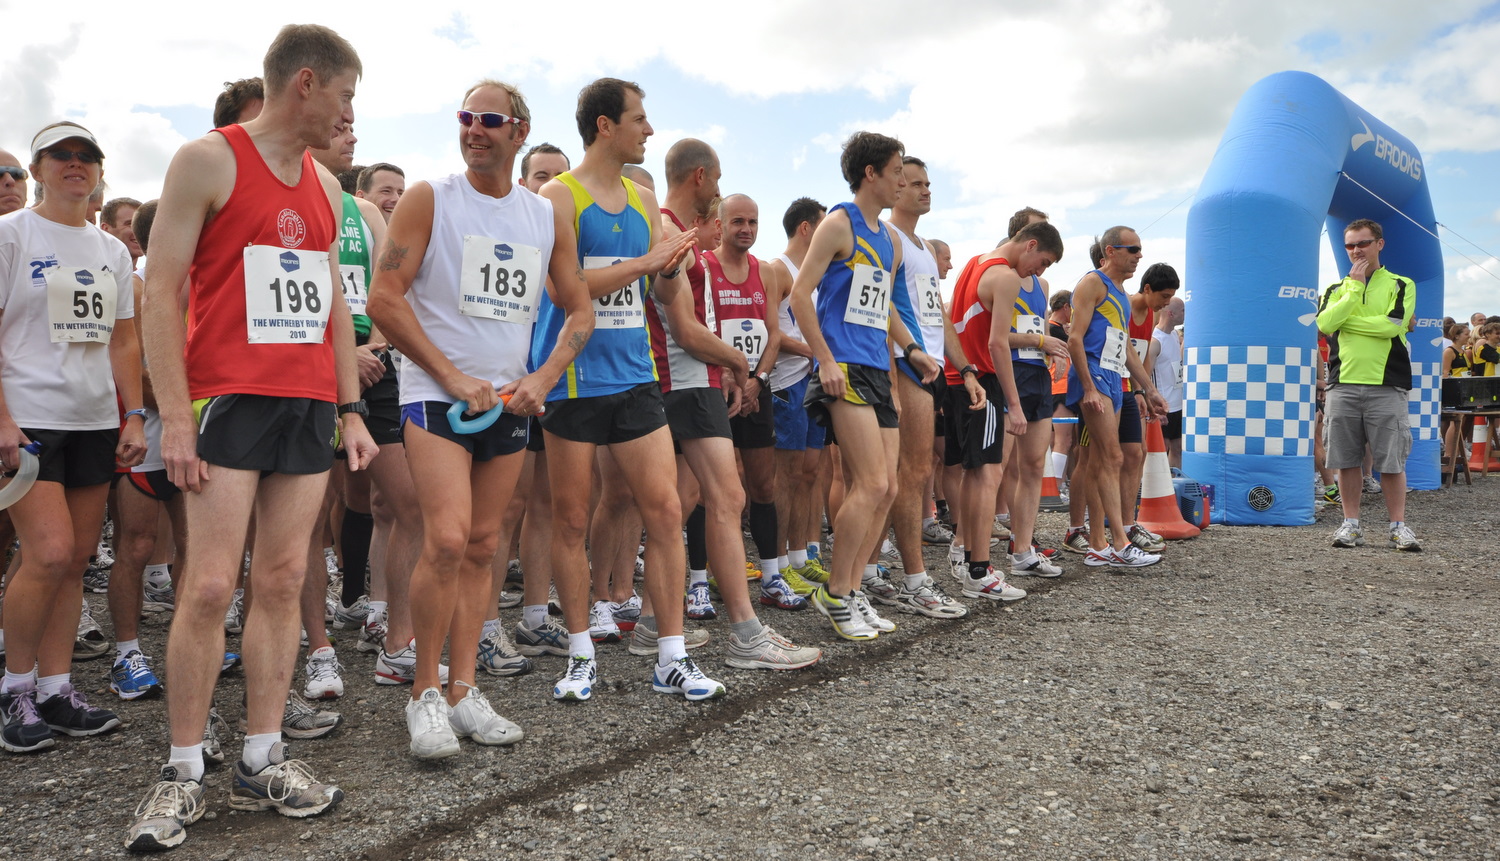 The Wetherby Run - 10k